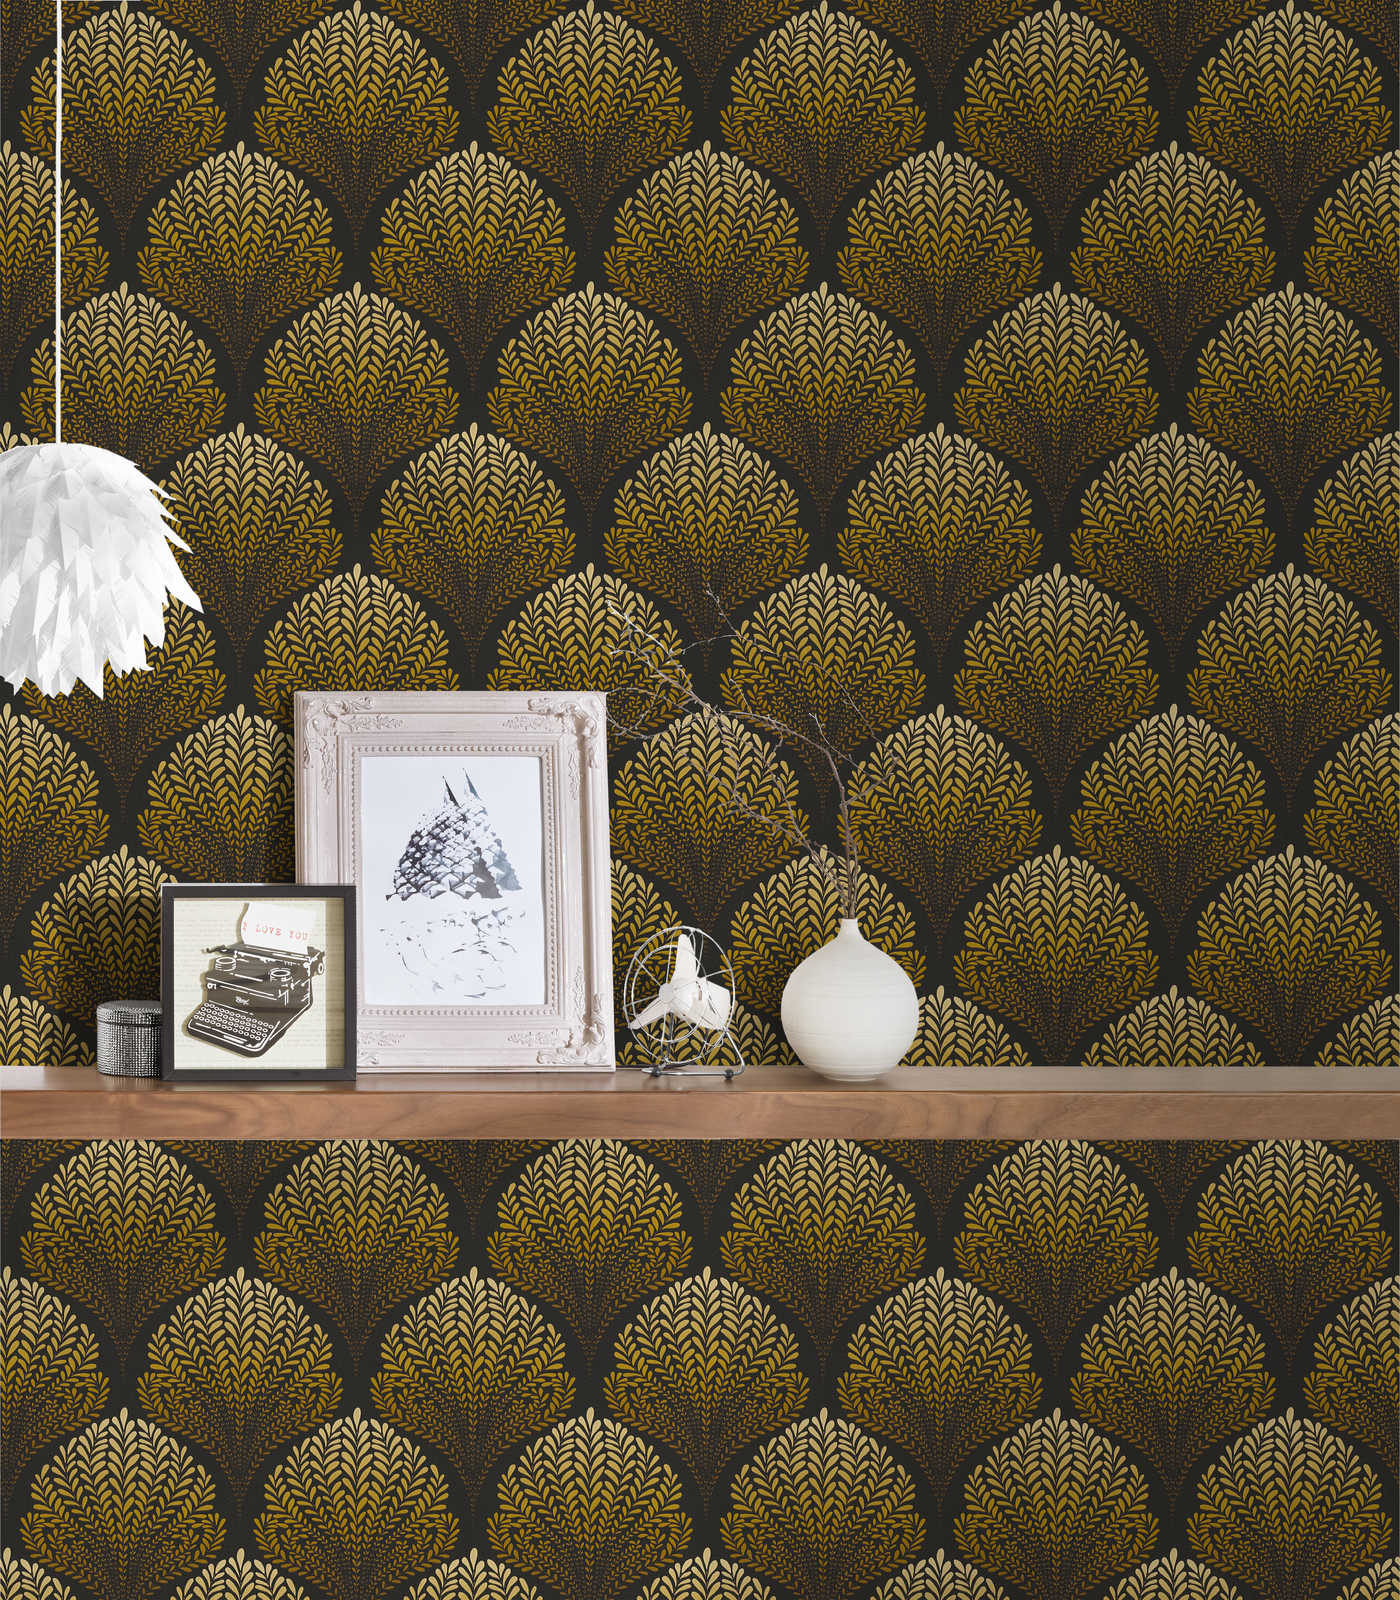             Retro wallpaper with gold ornaments - brown, yellow, black
        